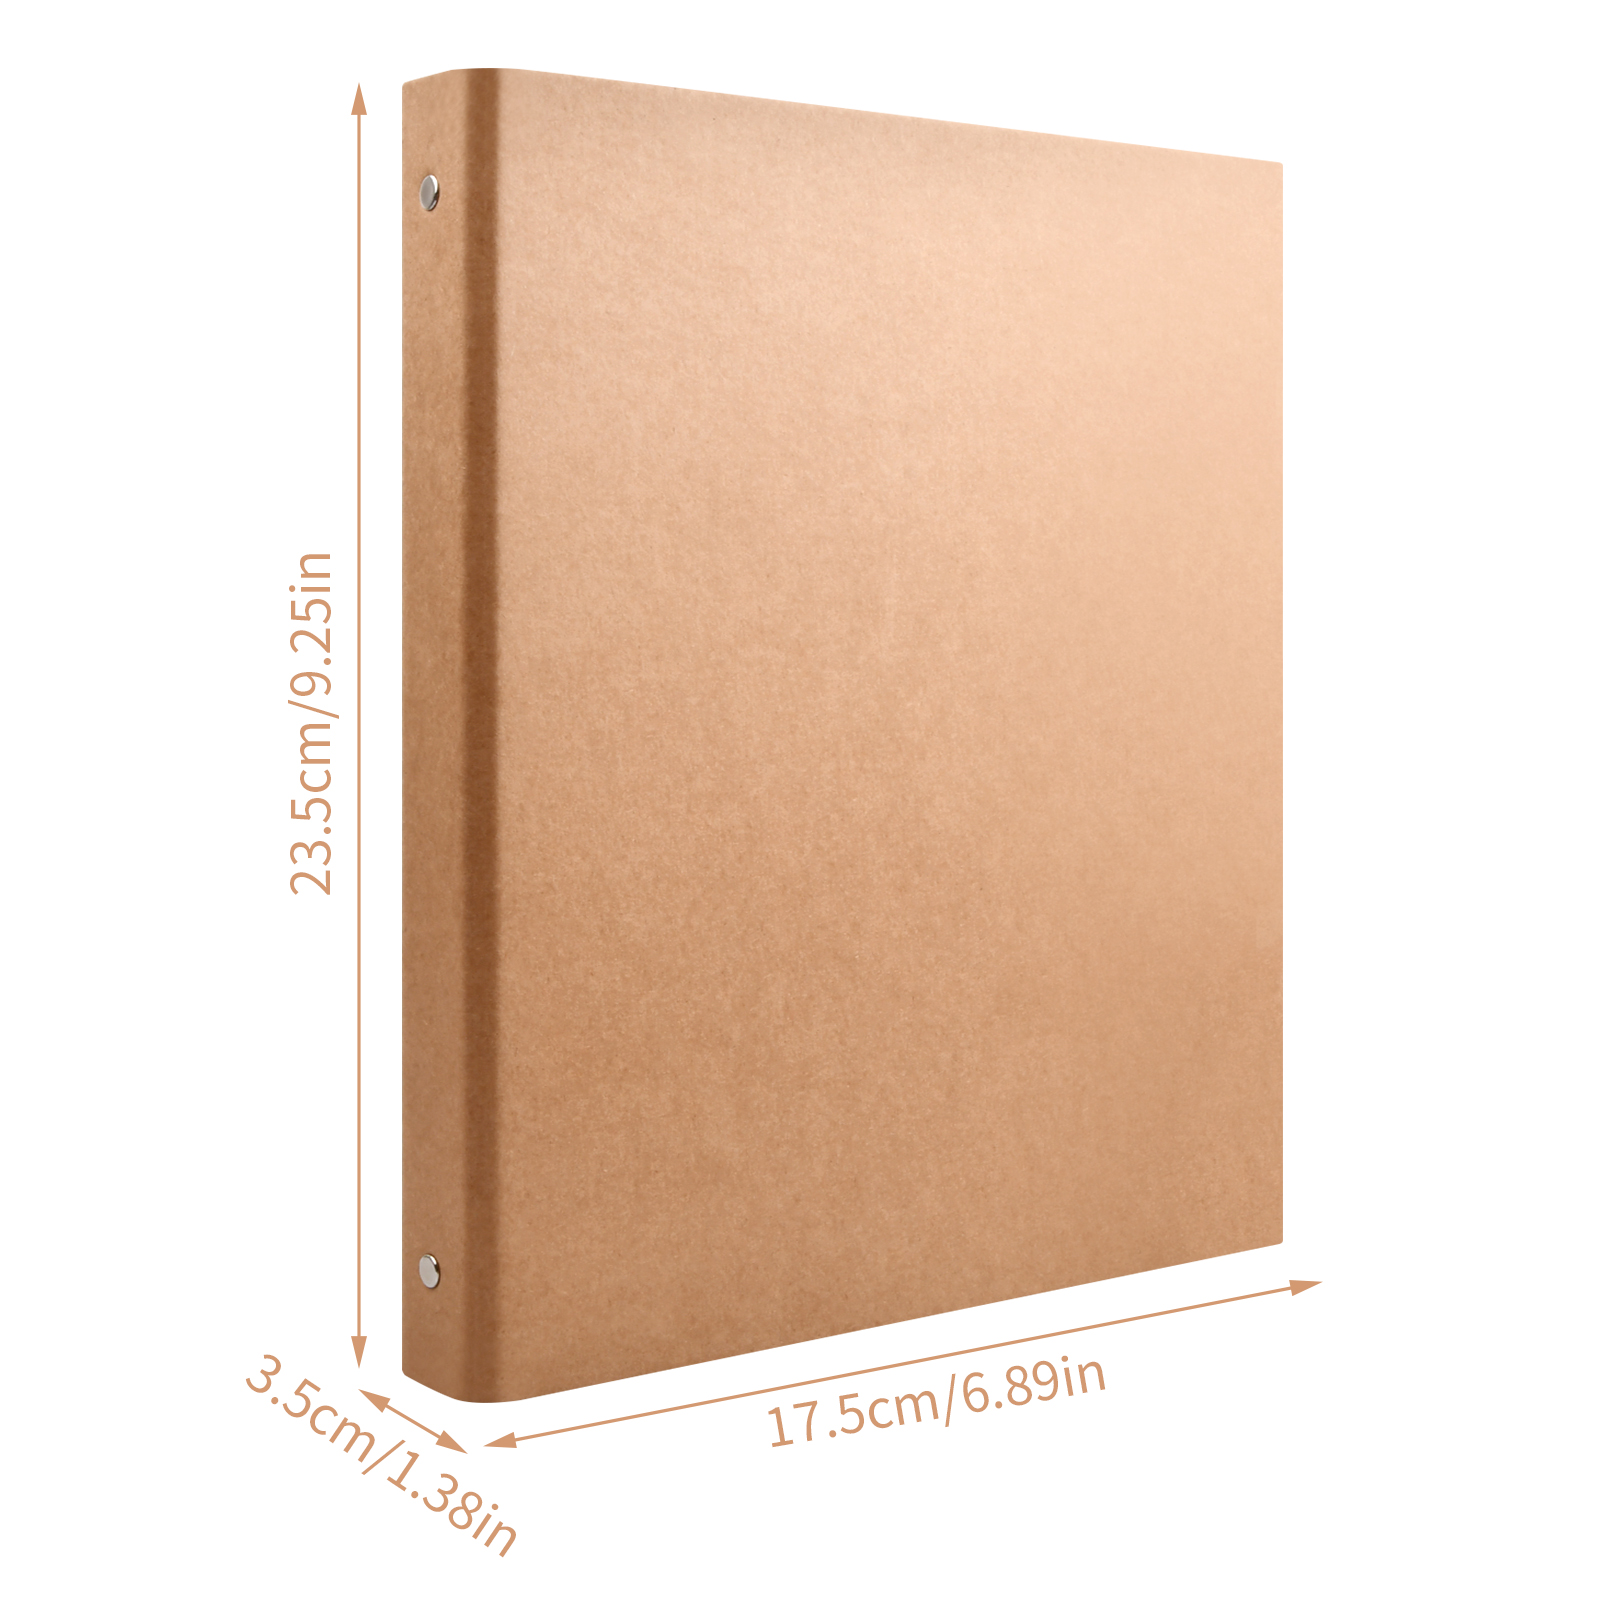  Craftelier - Ring Binder for Scrapbooking and Craft Projects, 30 Sheets Brown Kraft Colour, 190 gsm Weight, Vintage Bronze Spiral Ring  Binder